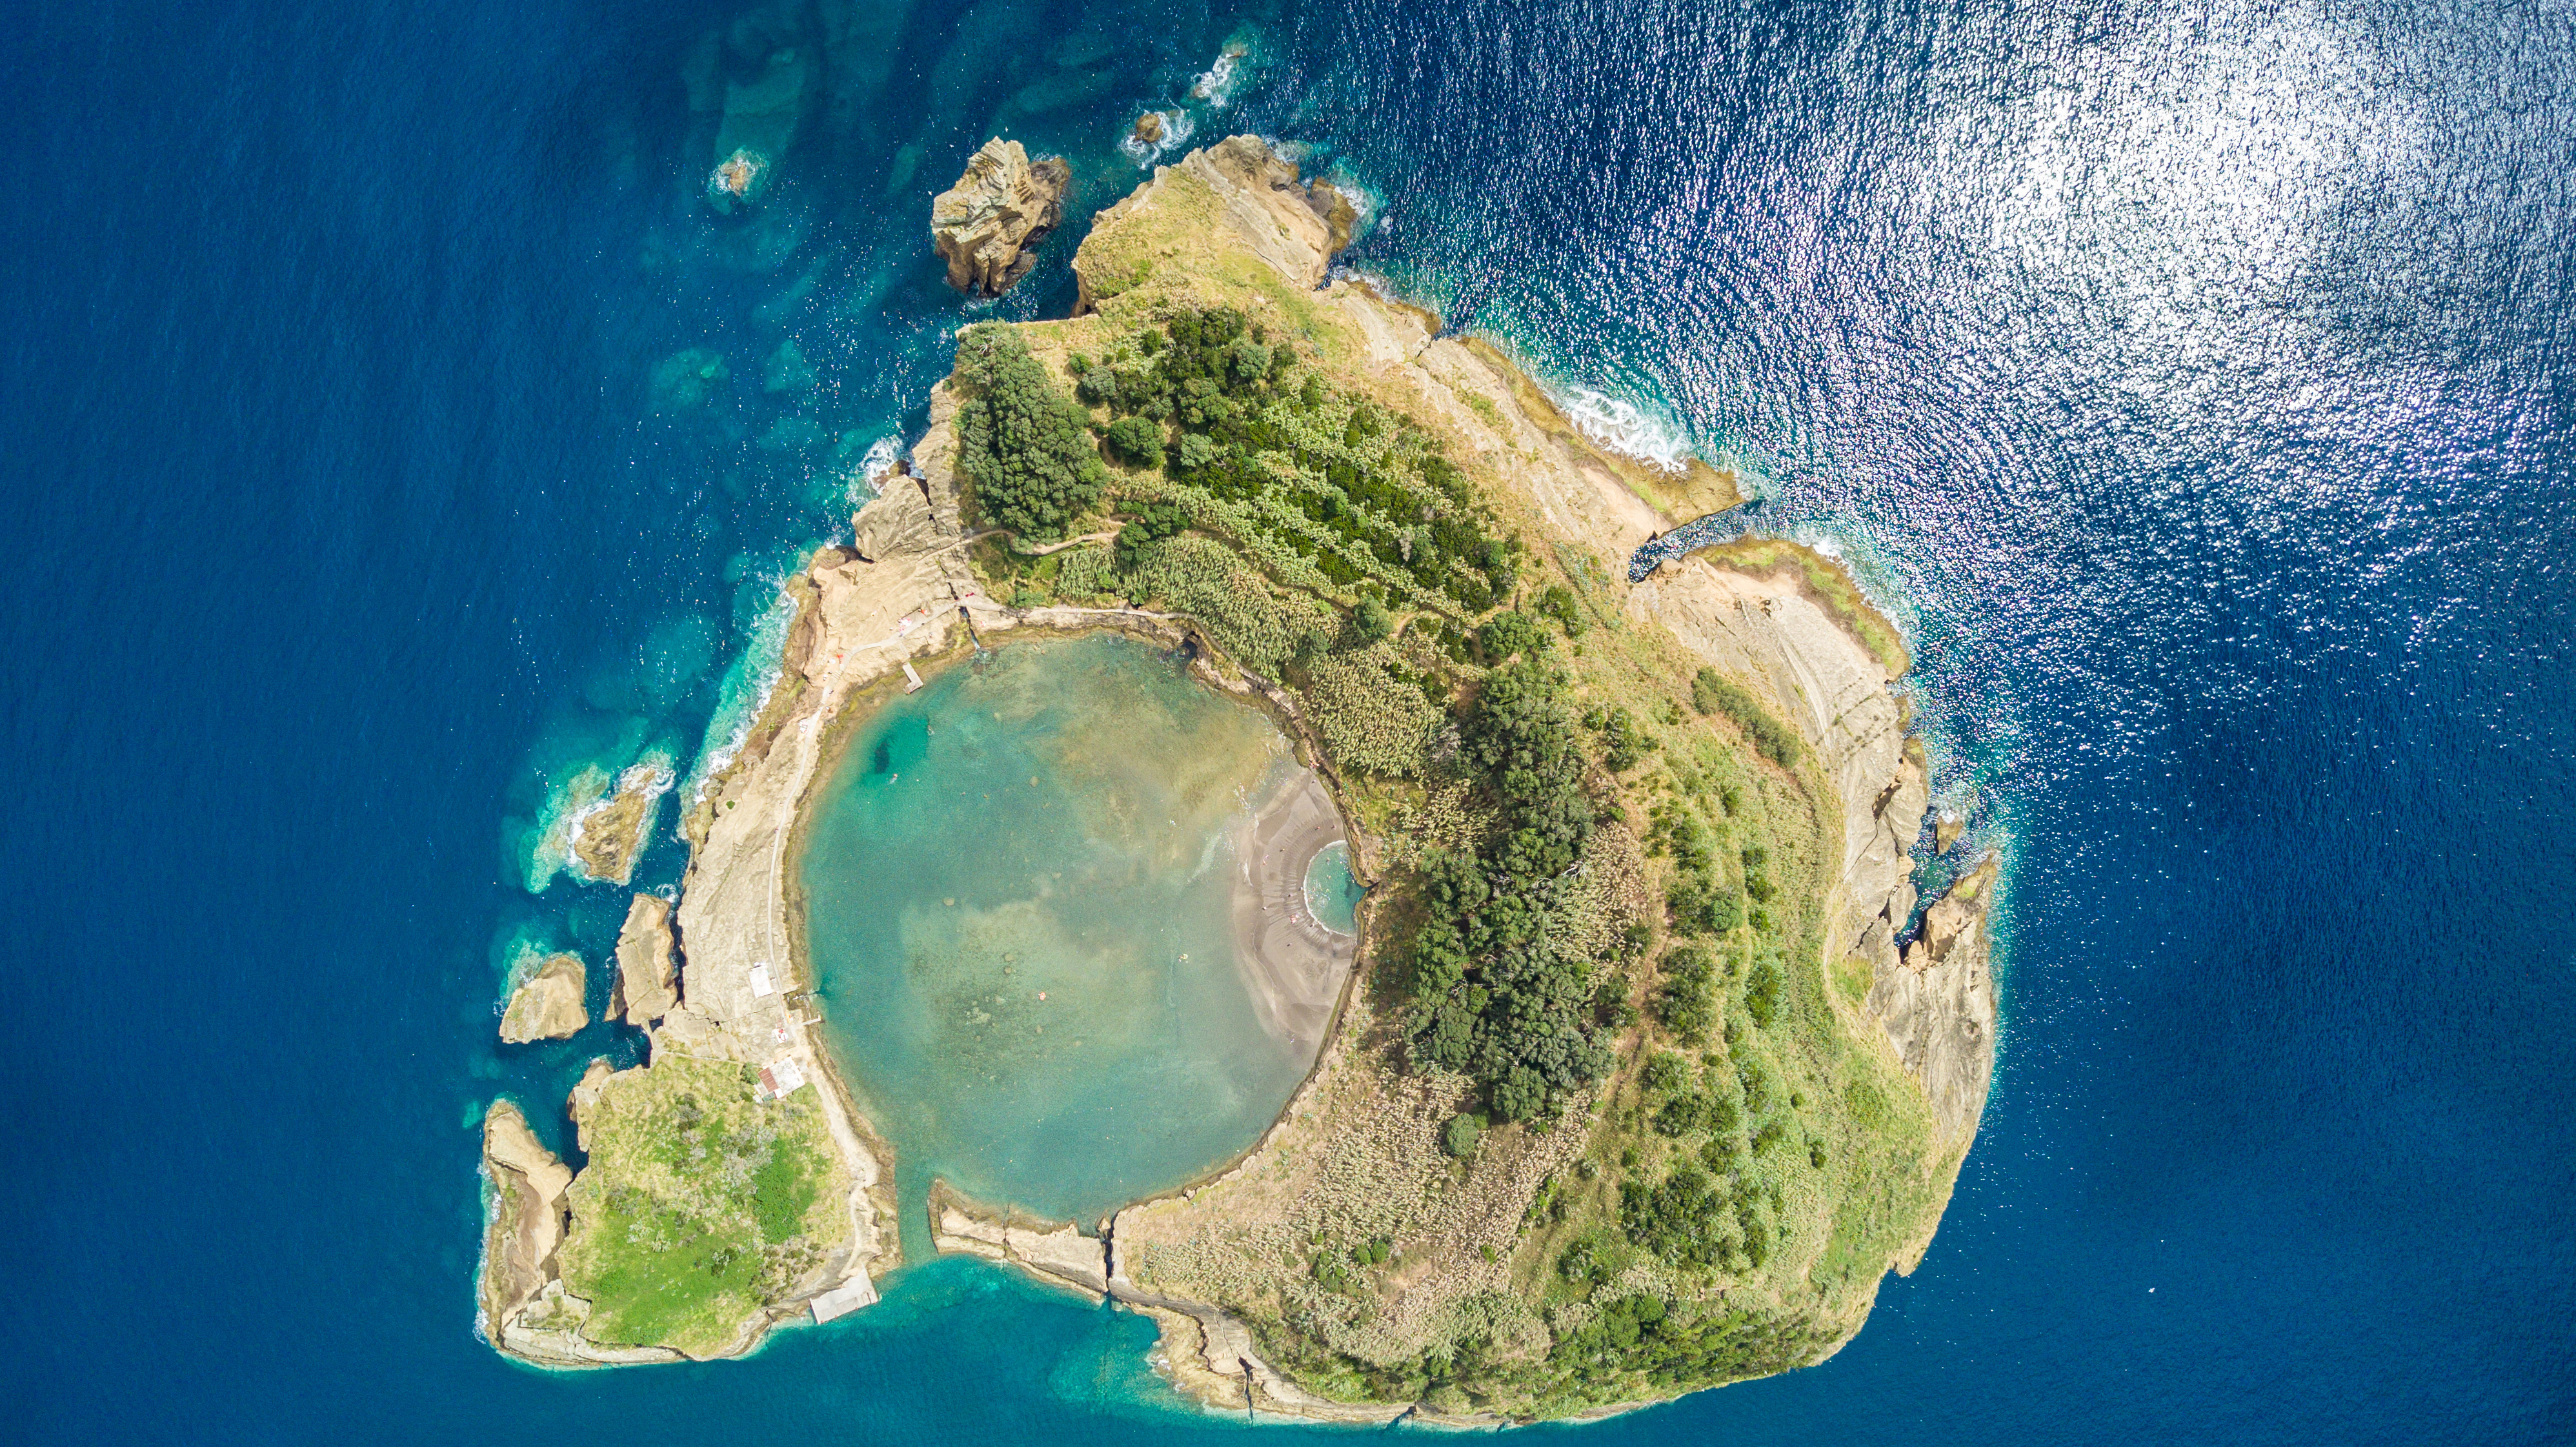 Top view of Islet of Vila Franca do Campo is formed by the crater of an old underwater volcano near San Miguel island, Azores, Portugal. Bird eye view, aerial panoramic view.